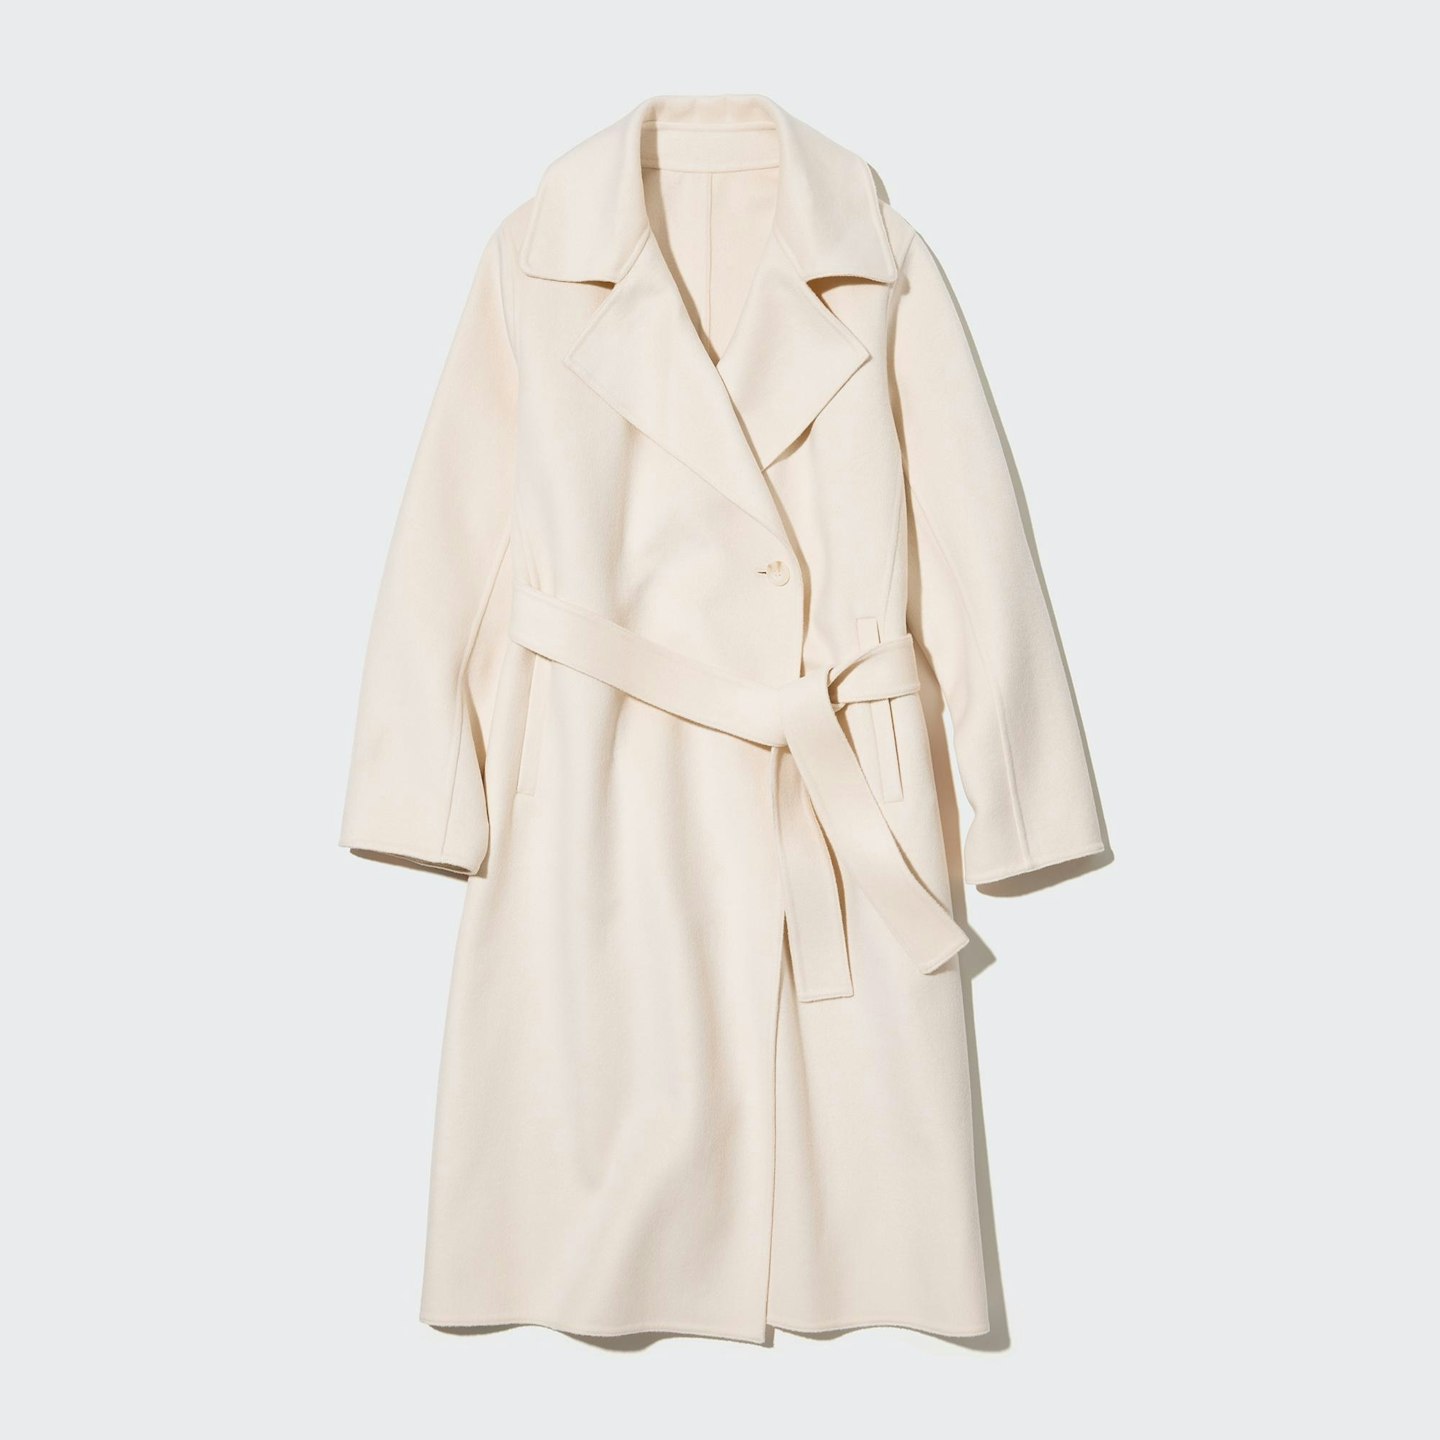 Chic Cream Coats That You Need To Add To Your Wardrobe Pronto